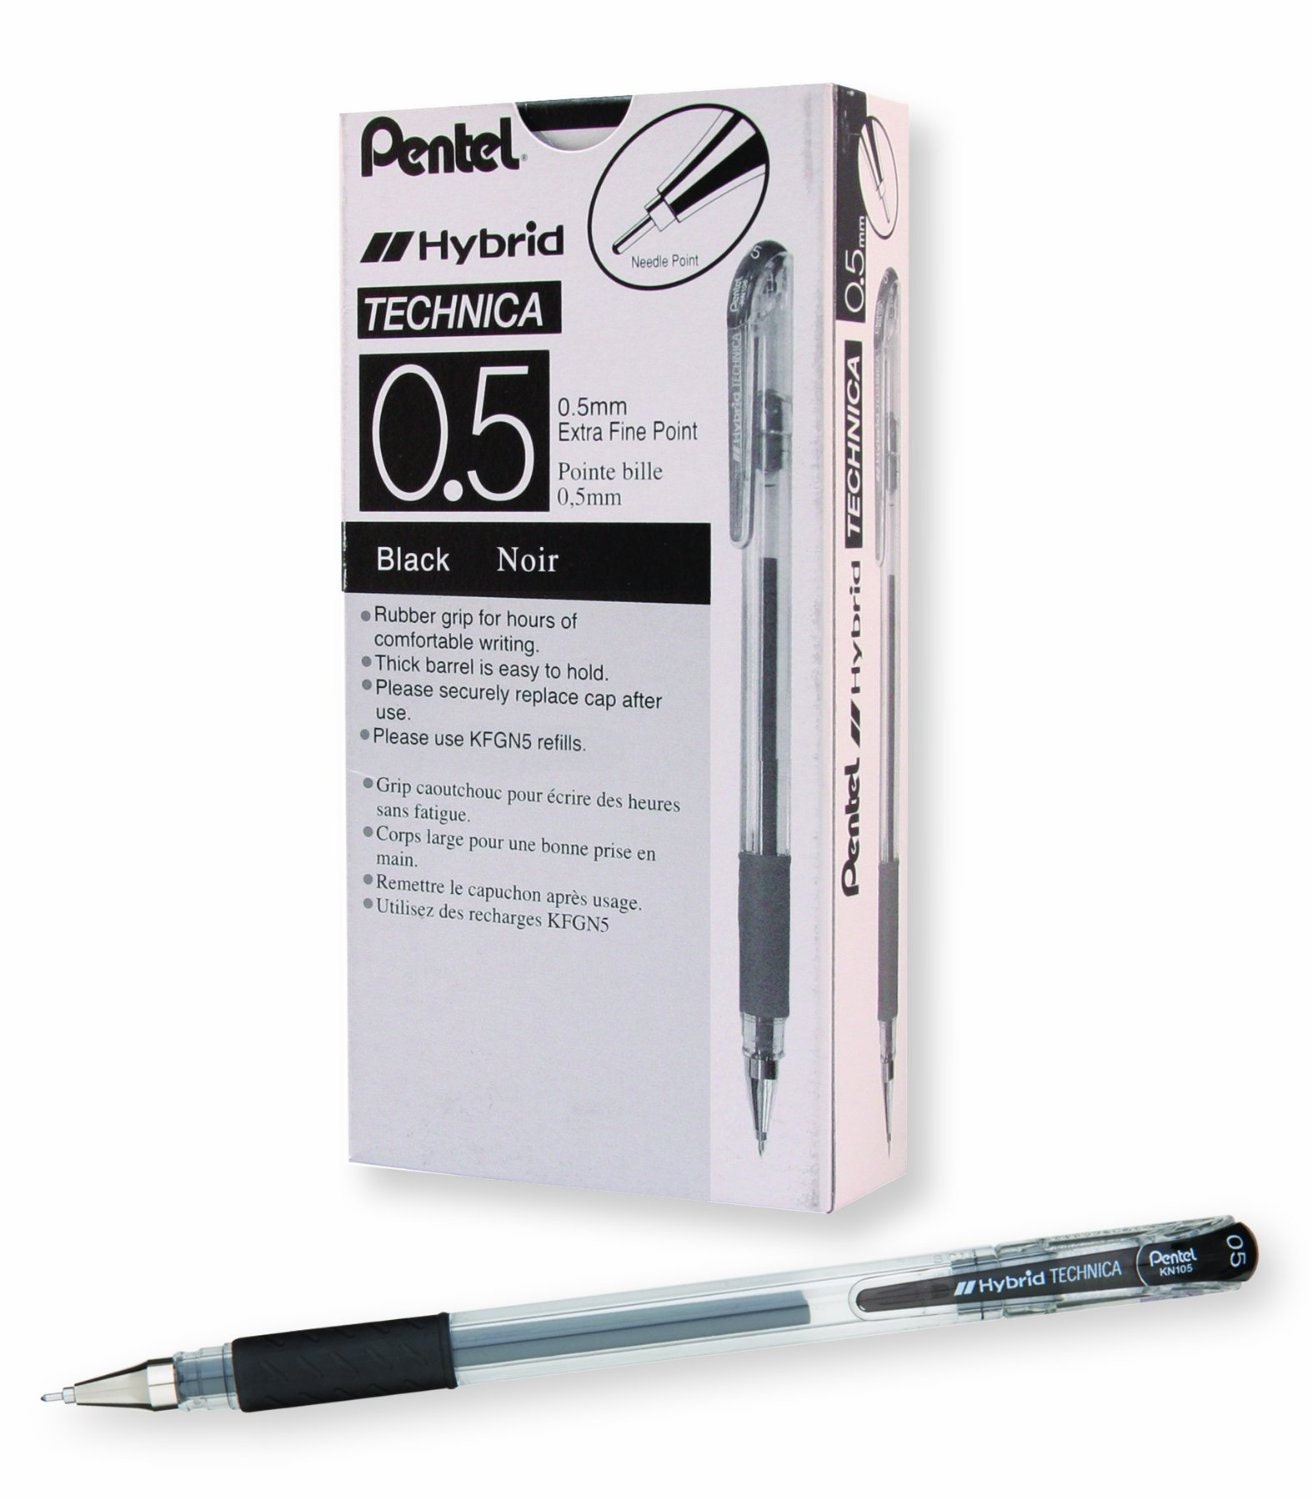 Needle Point 12 Count 0.5mm Precision Pen Rollerball Pen Black Ink 